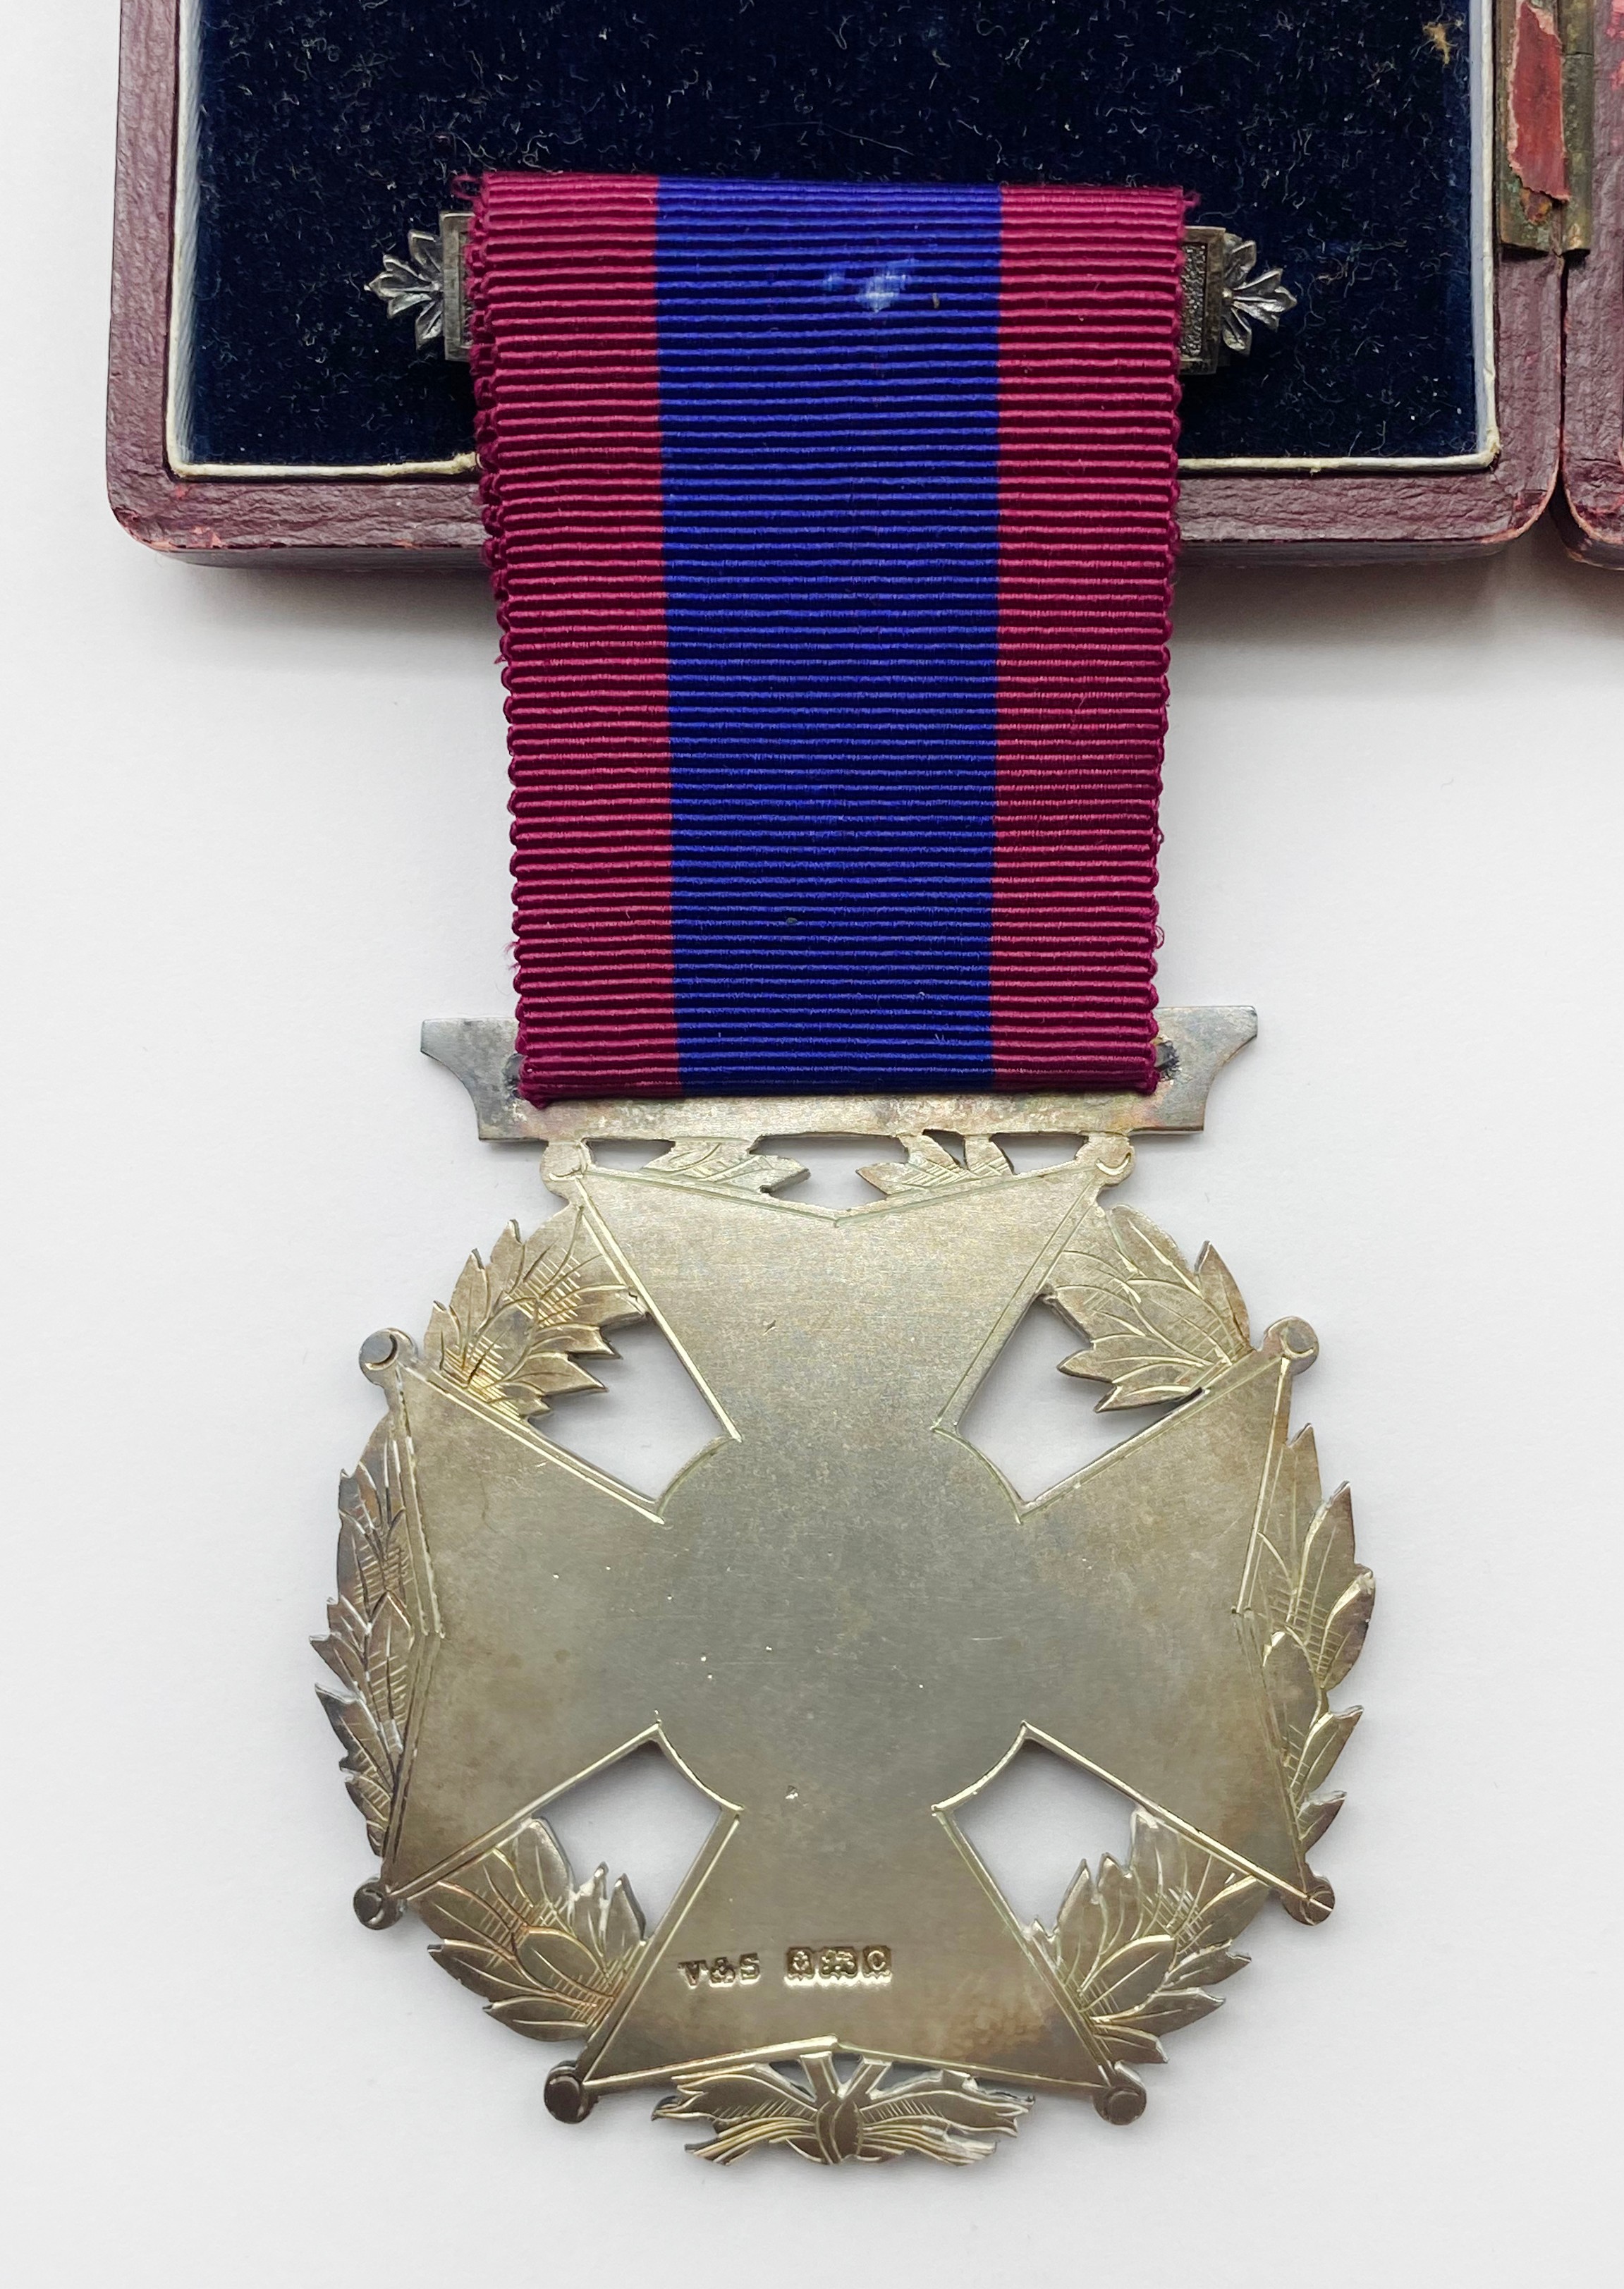 SIX CASED MASONIC MEDALS - Image 3 of 27